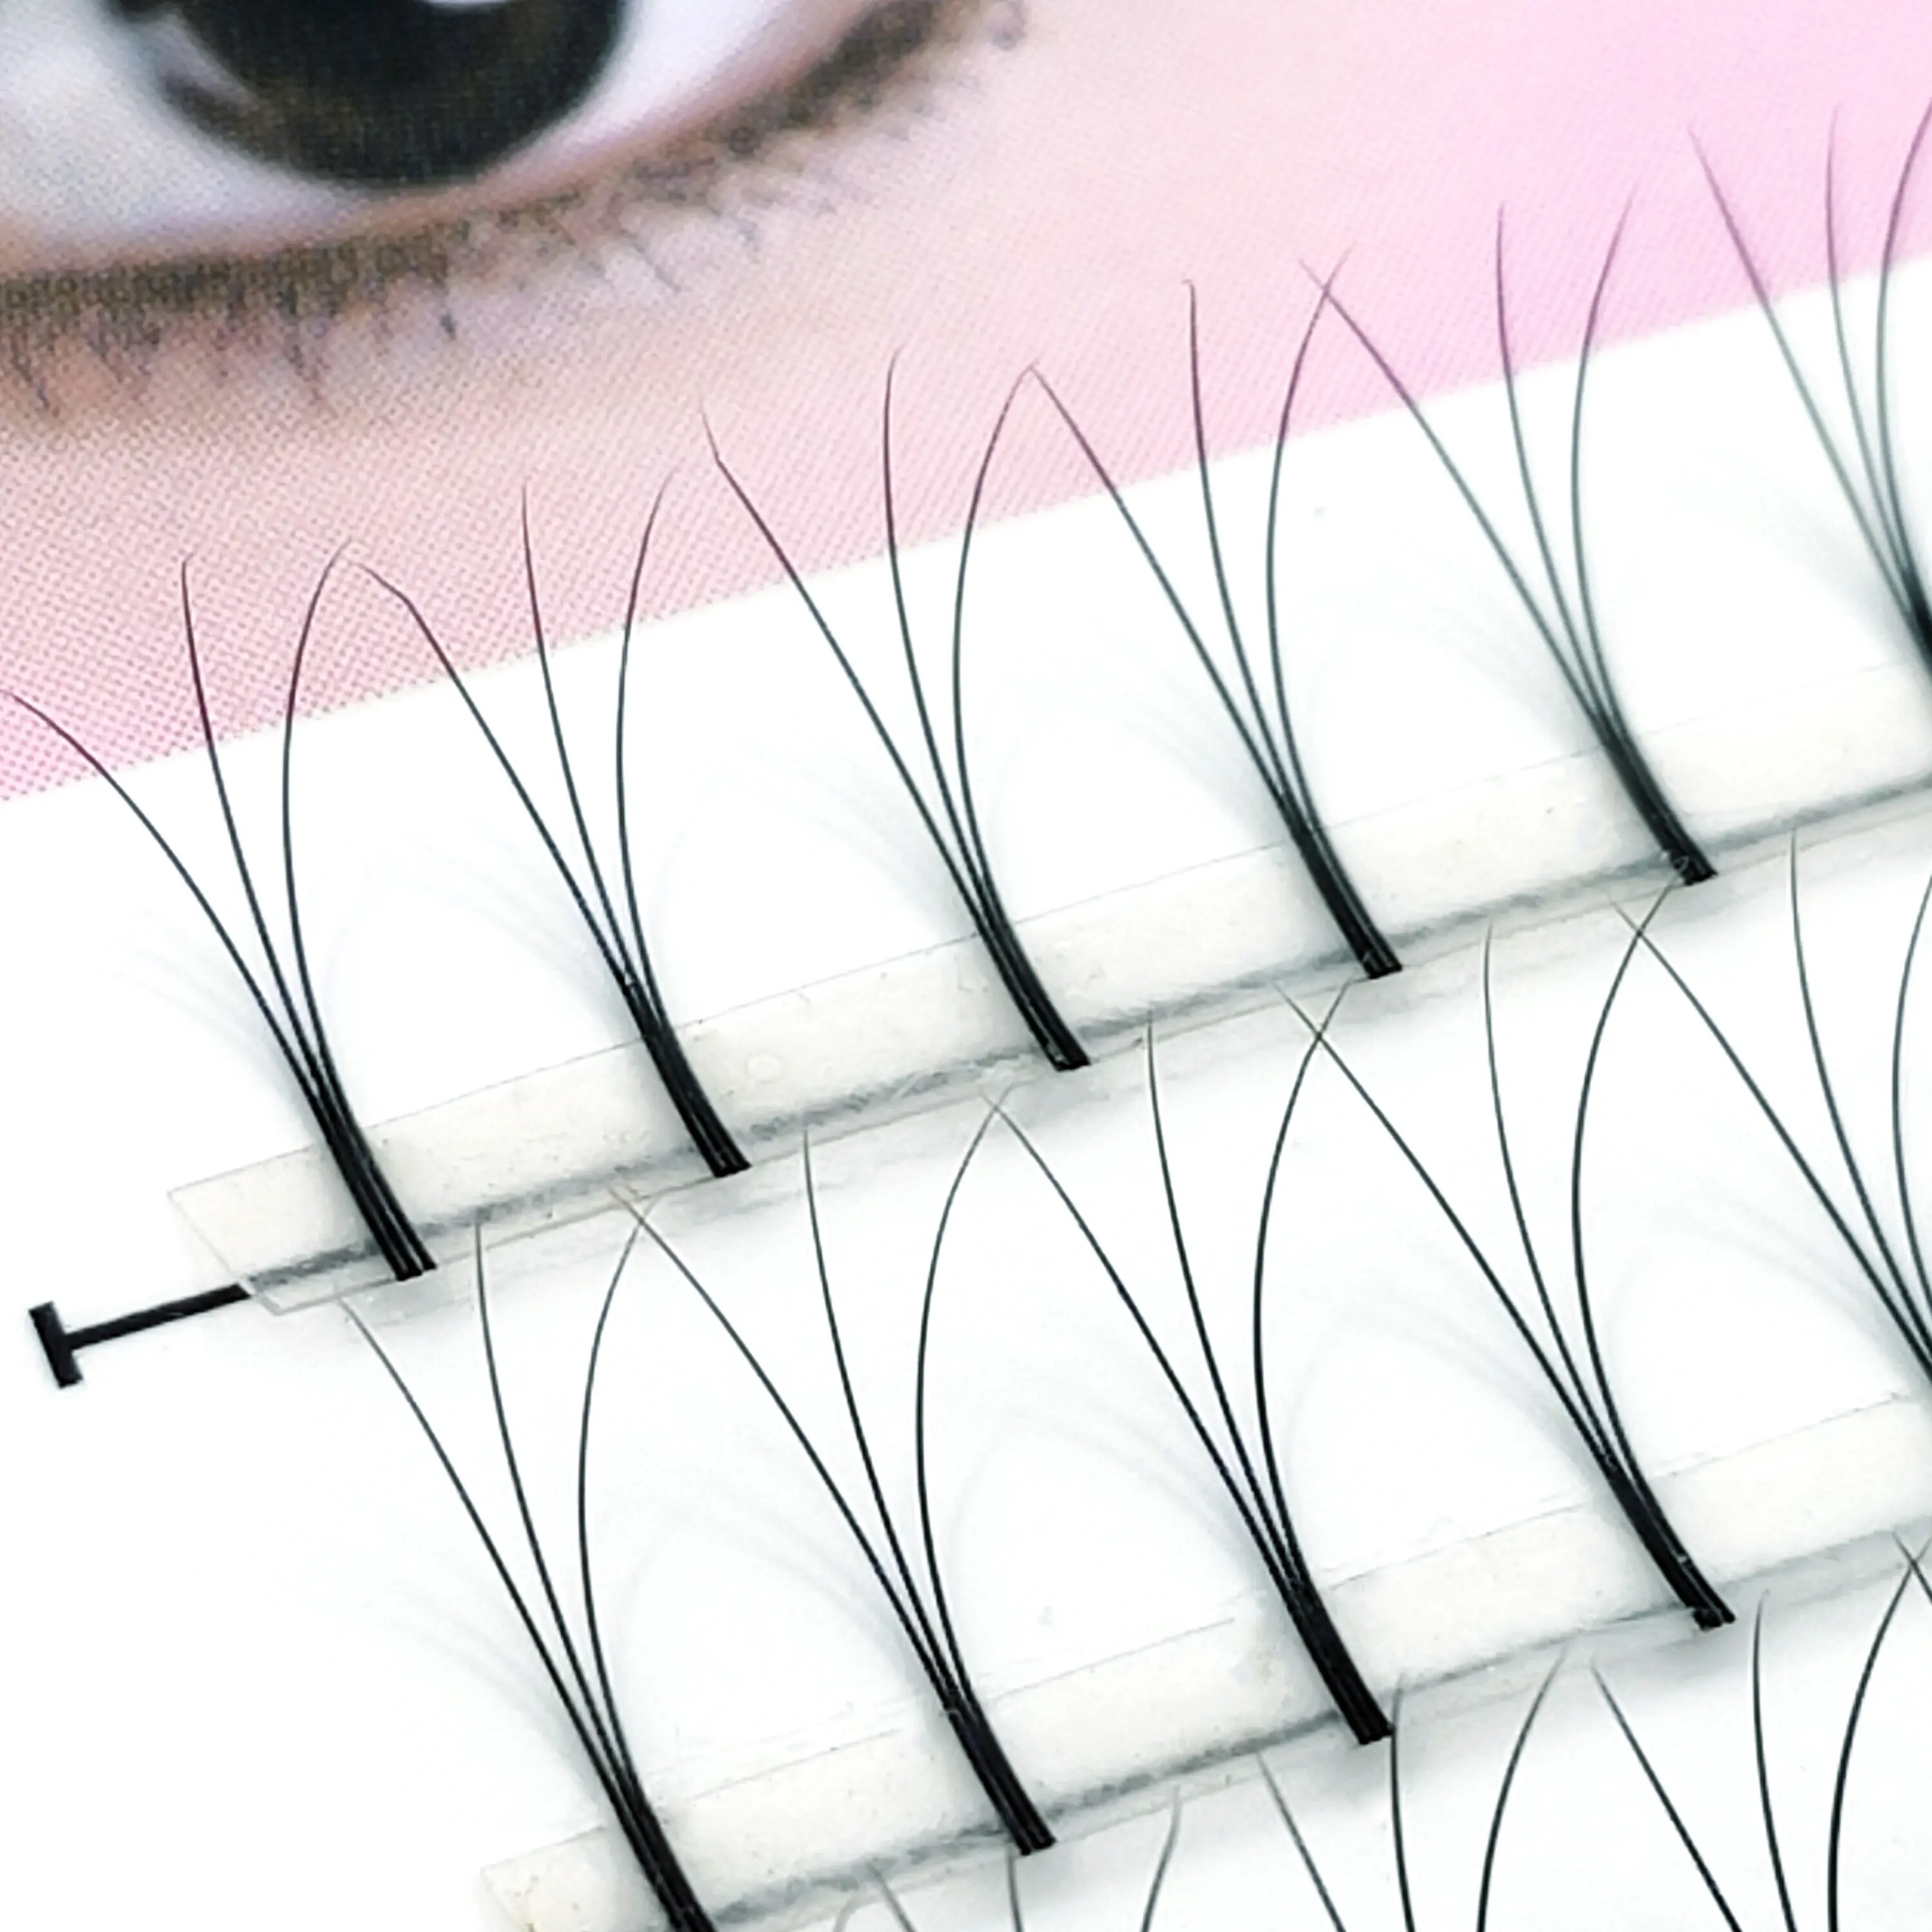 OEM ODM Private Label Premade Fans Lashes Customized Long Stem Premade Fans Eyelashes Hand Made Volume Lashes Extensions